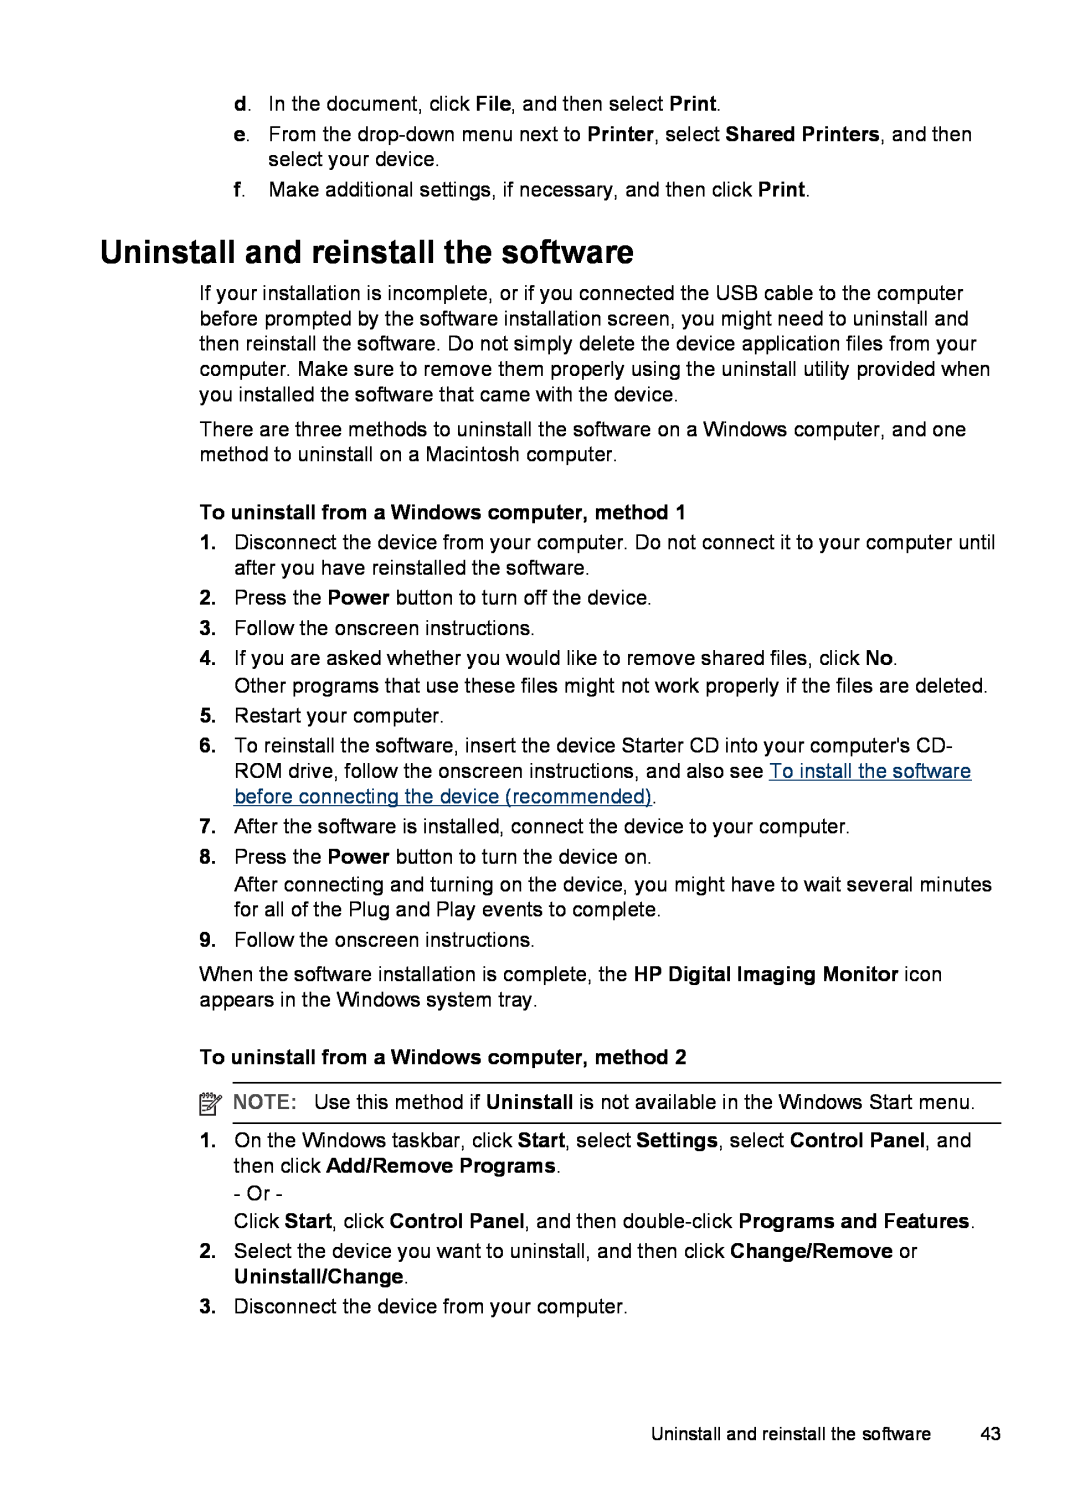 HP K5300, Pro K5400 manual Uninstall and reinstall the software, To uninstall from a Windows computer, method 